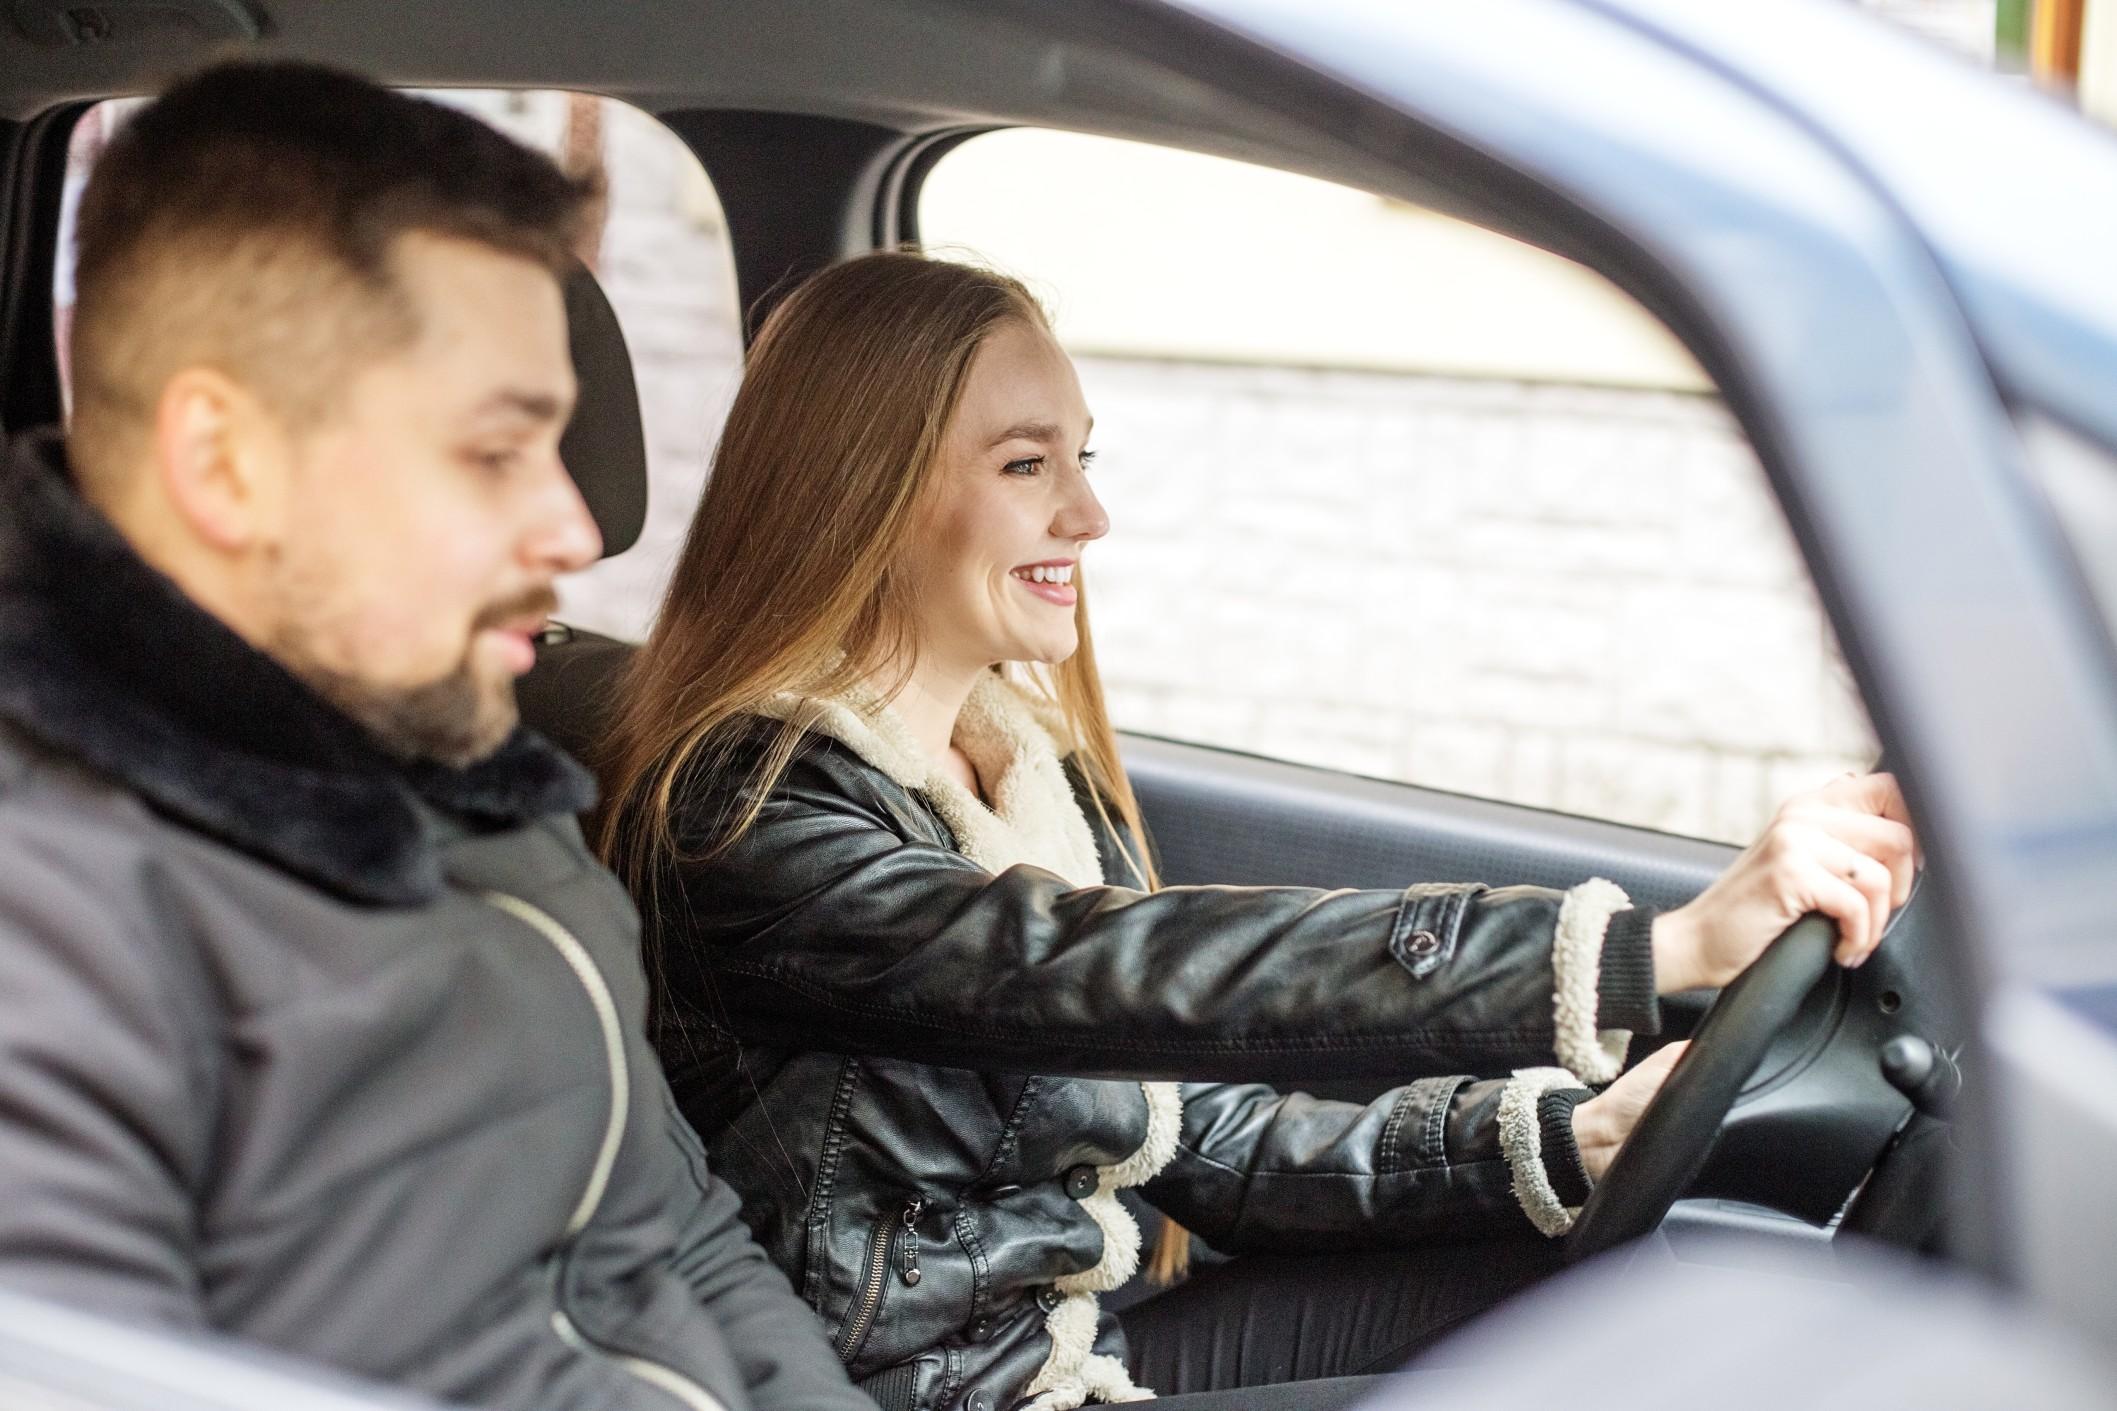 Make sure you have the right insurance while ridesharing | Twenty20